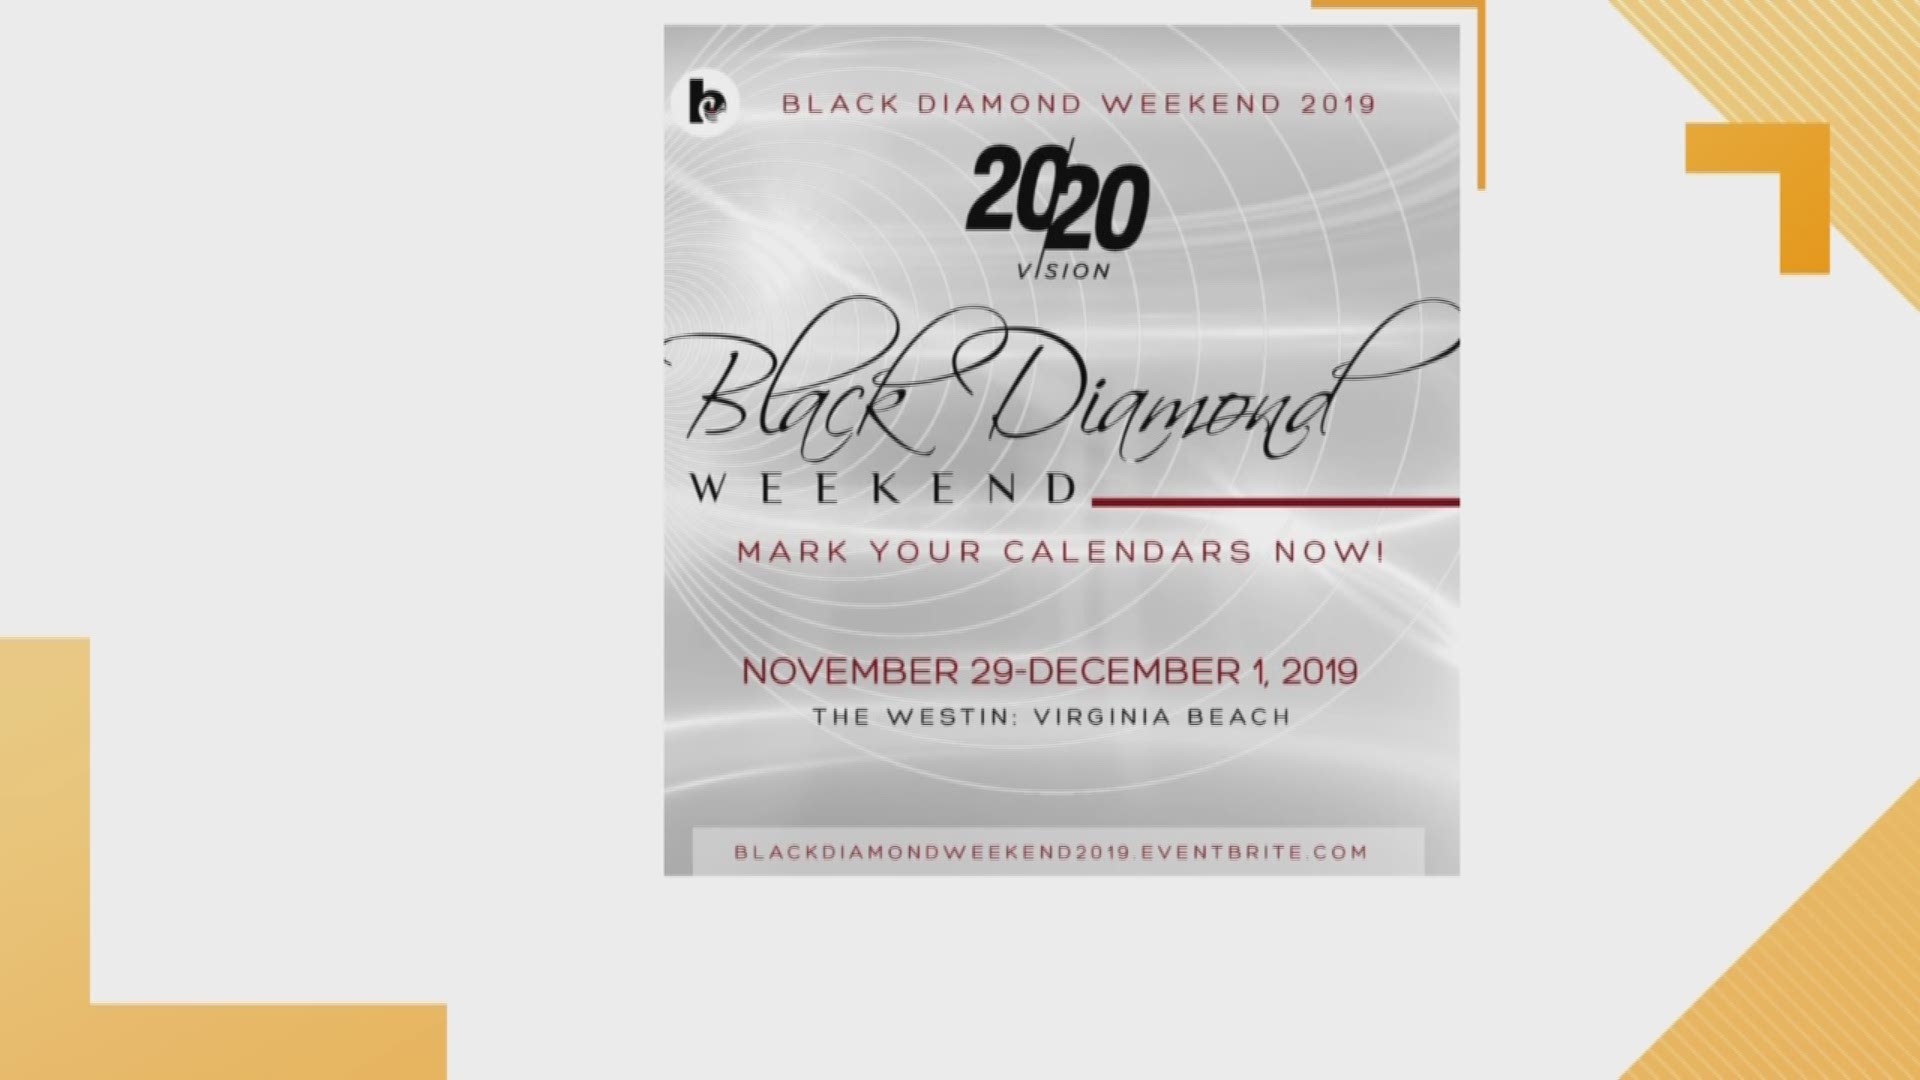 Hampton Roads Regional Black Chamber of Commerce, Kicks off it's 4th Annual Black Diamond Affair this weekend! Blair Durham told 13News Now all about the weekend.